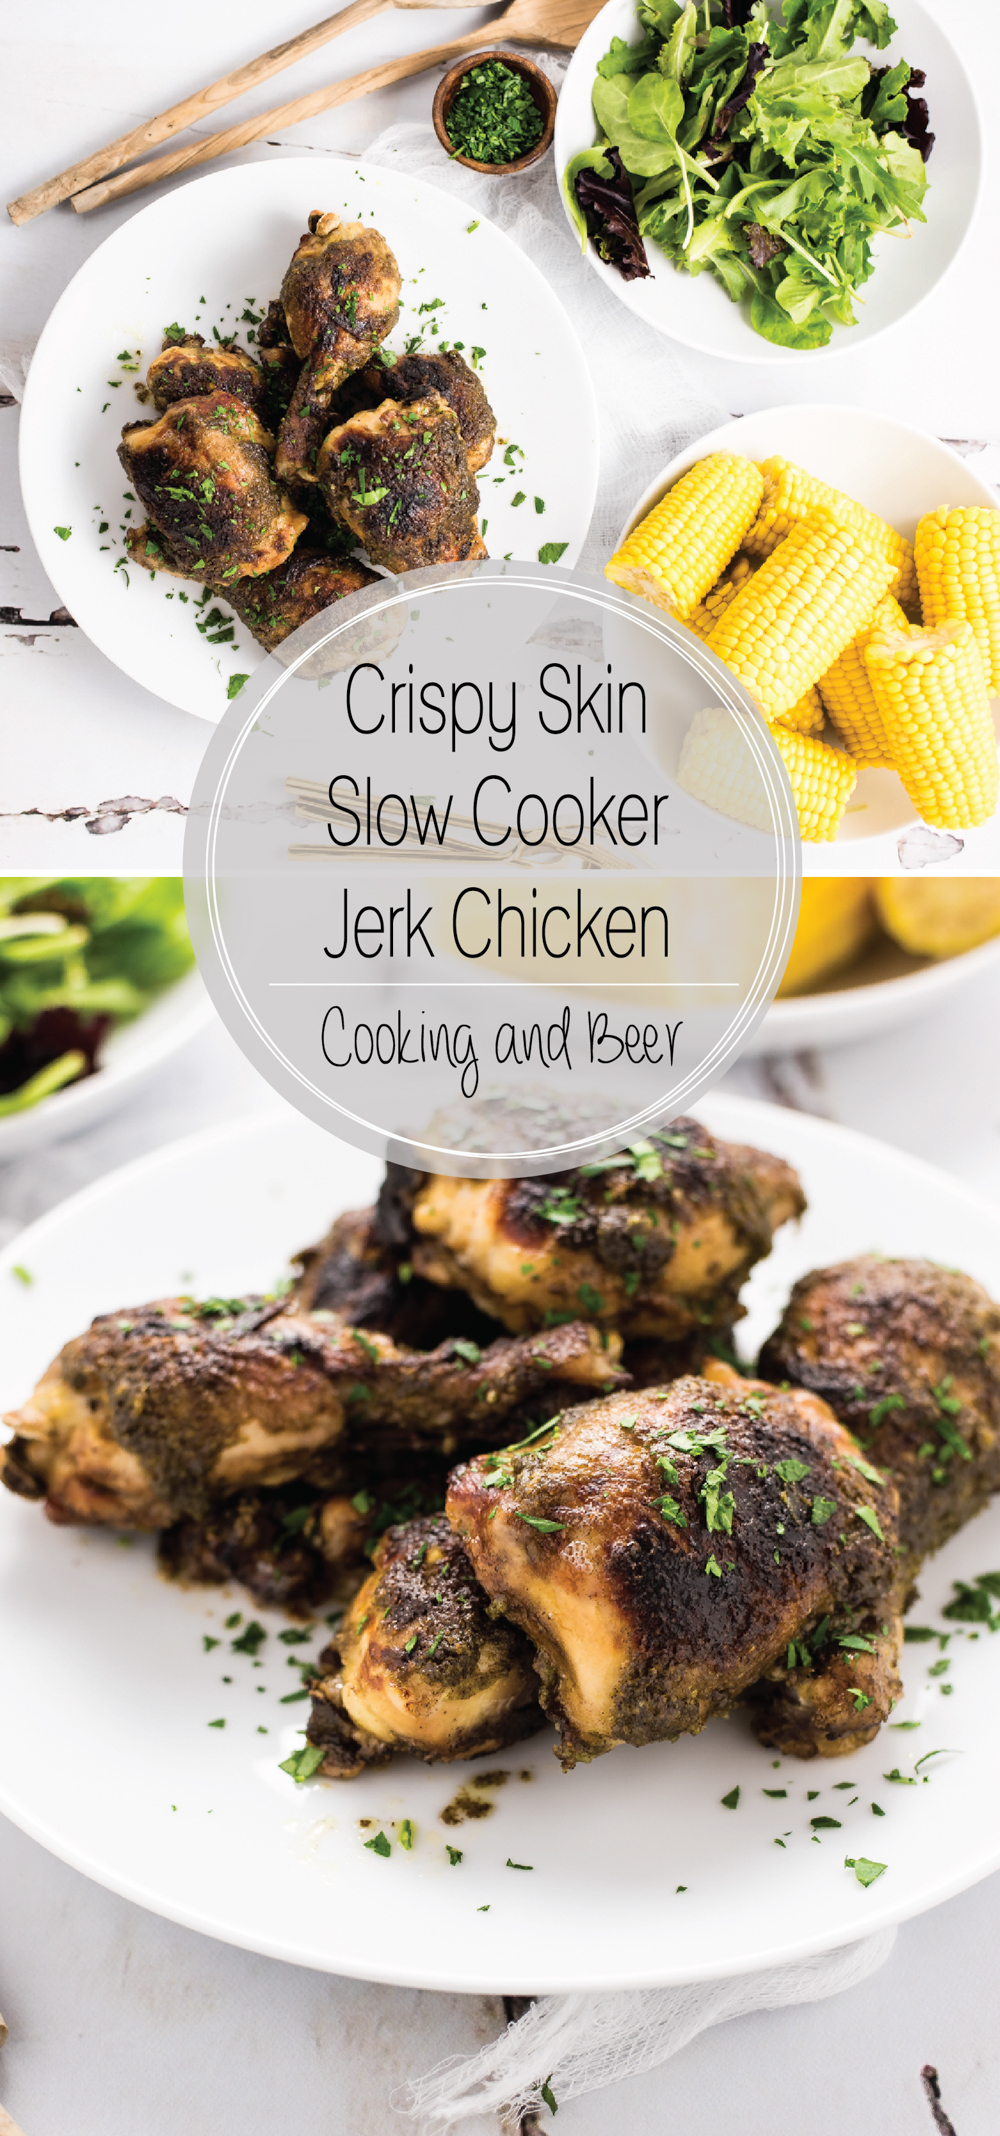 Crispy Skin Slow Cooker Jerk Chicken is a family-friendly and simple weeknight dinner recipe with a spicy kick and a ton of flavor!